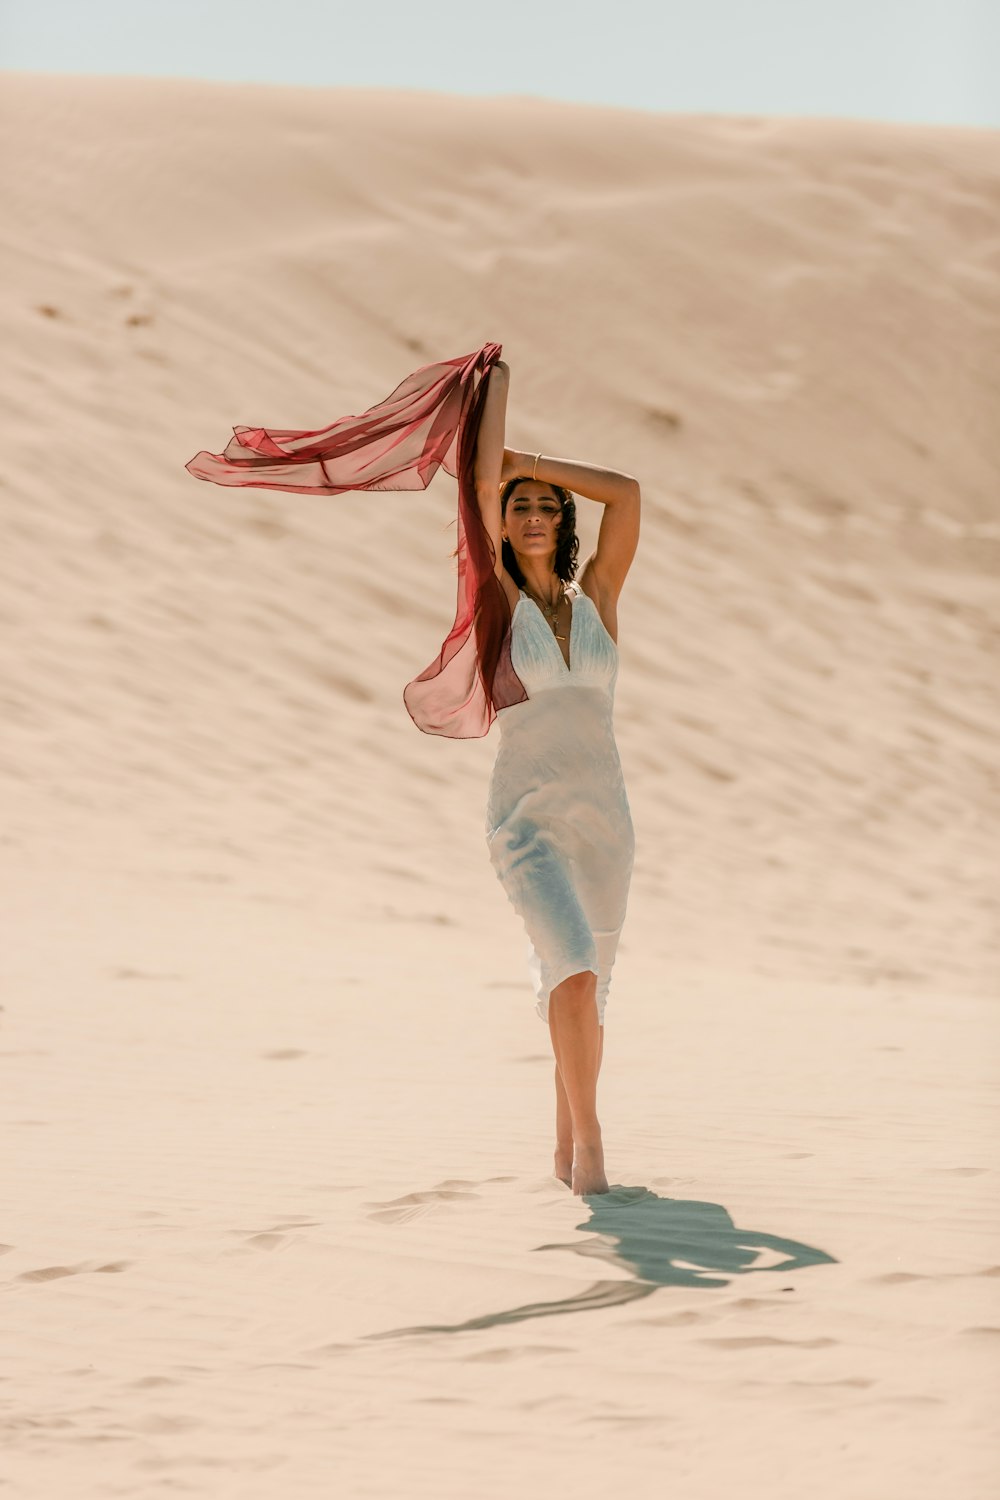 barefooted woman wearing white bodycon dress raising right hand while standing on desert during daytime